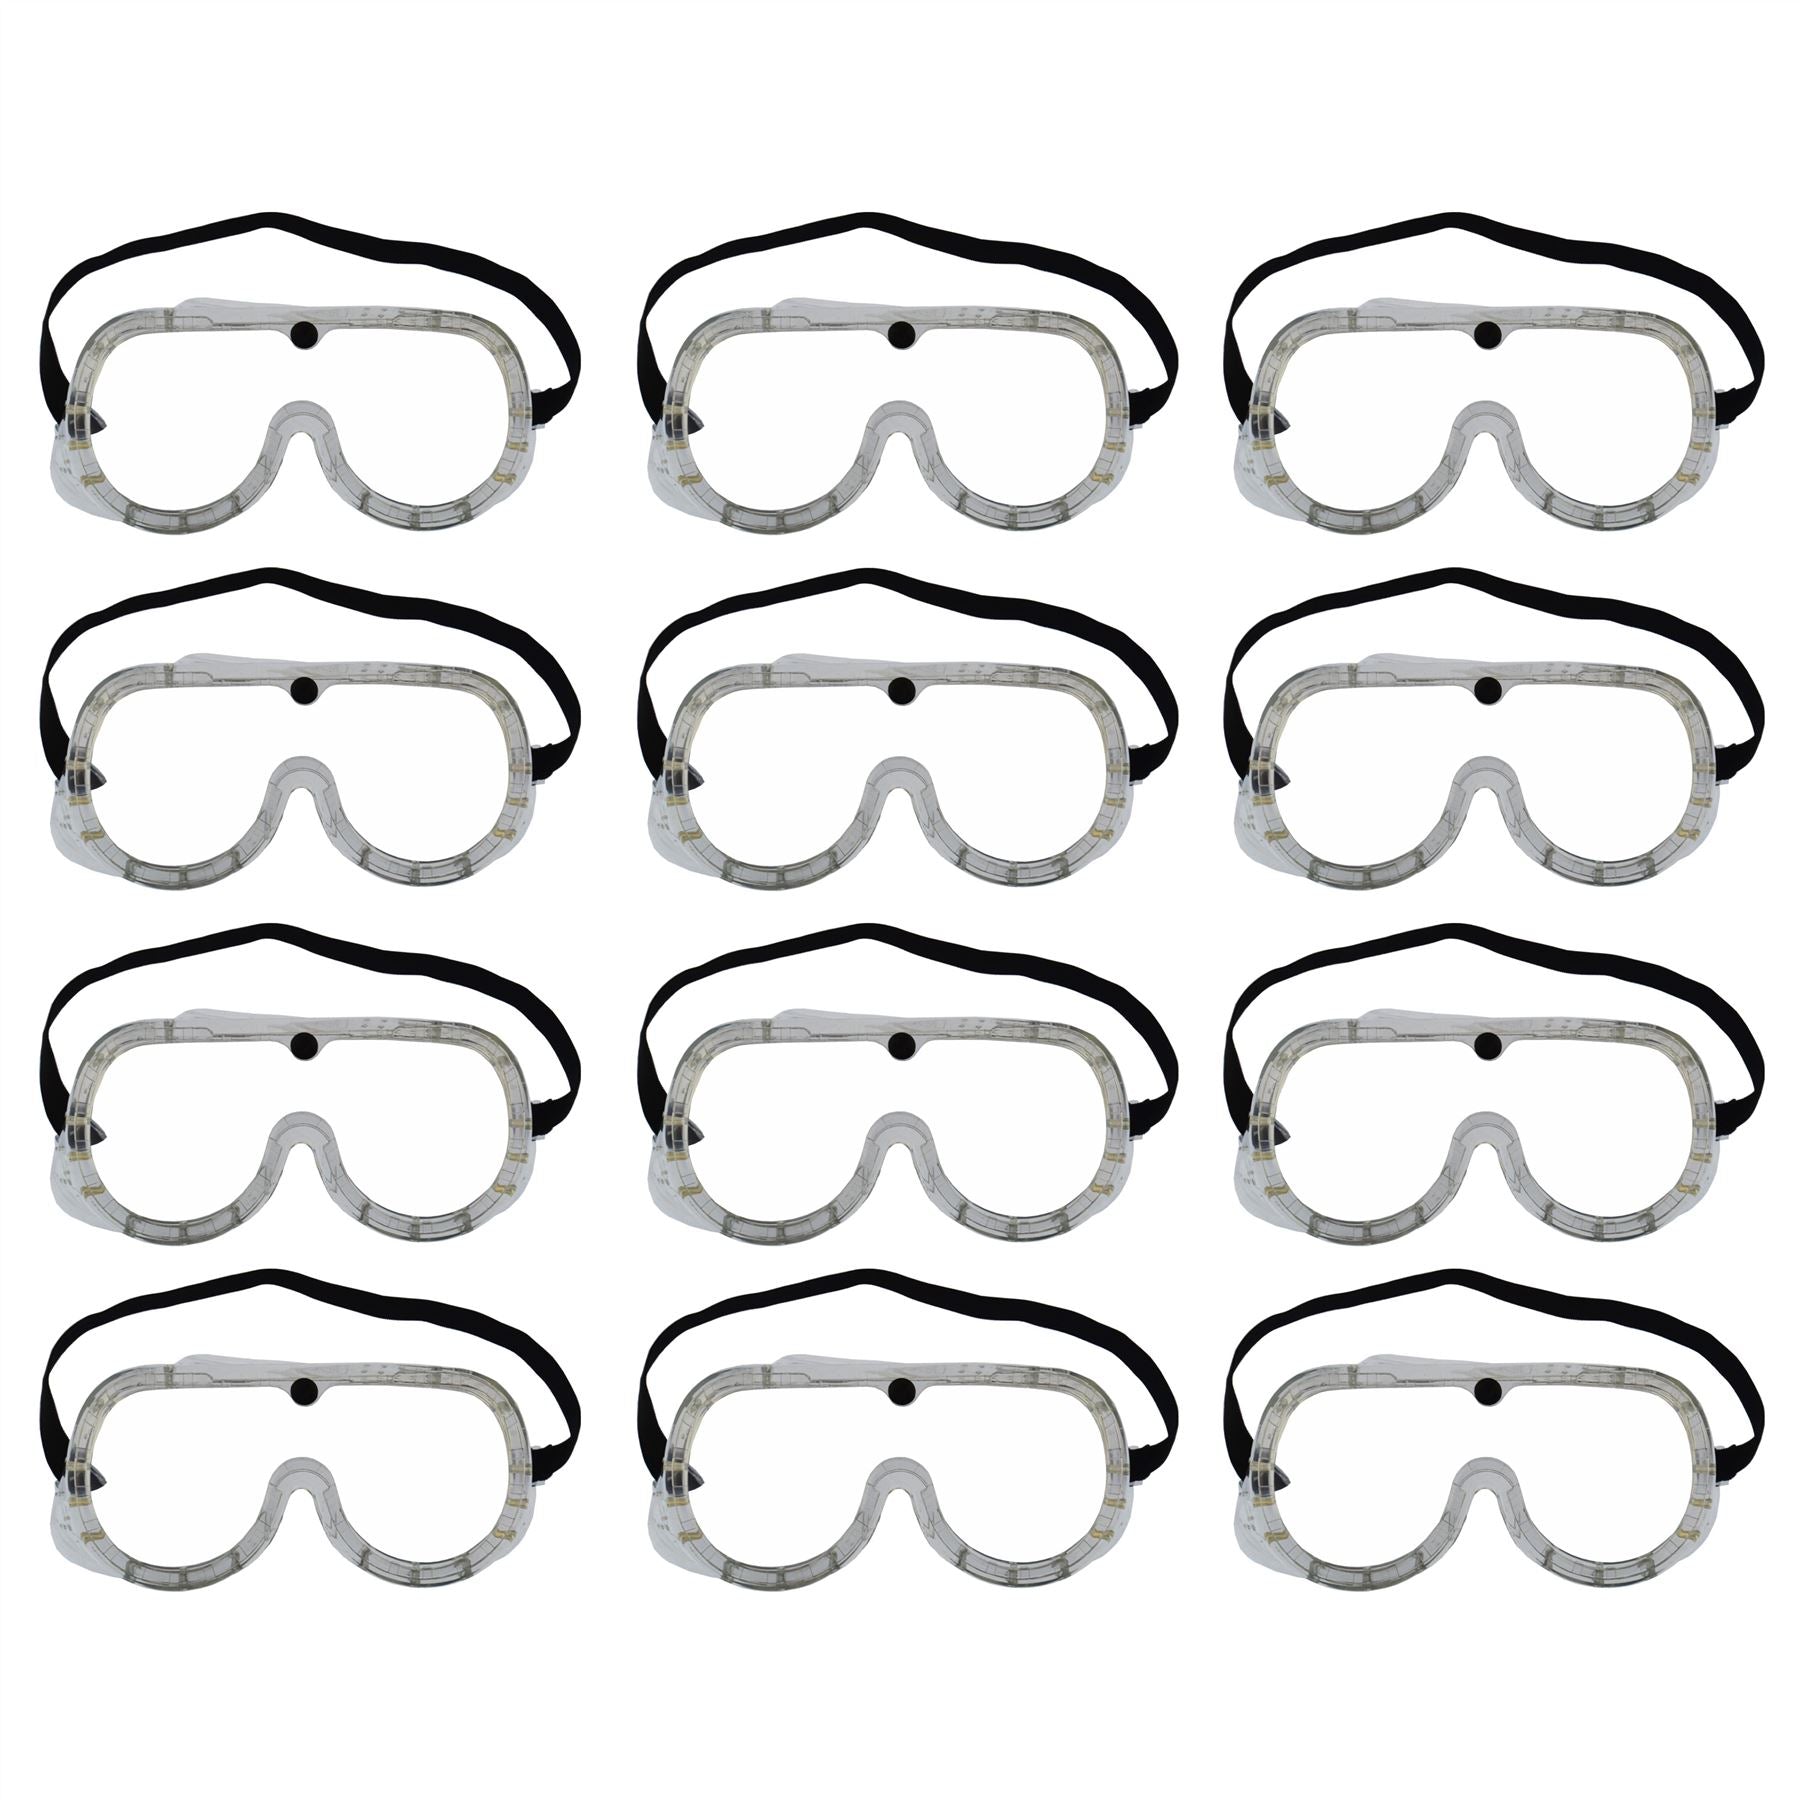 Safety Glasses / Goggles / DIY Eye Protection Industrial 12 Goggles AU045